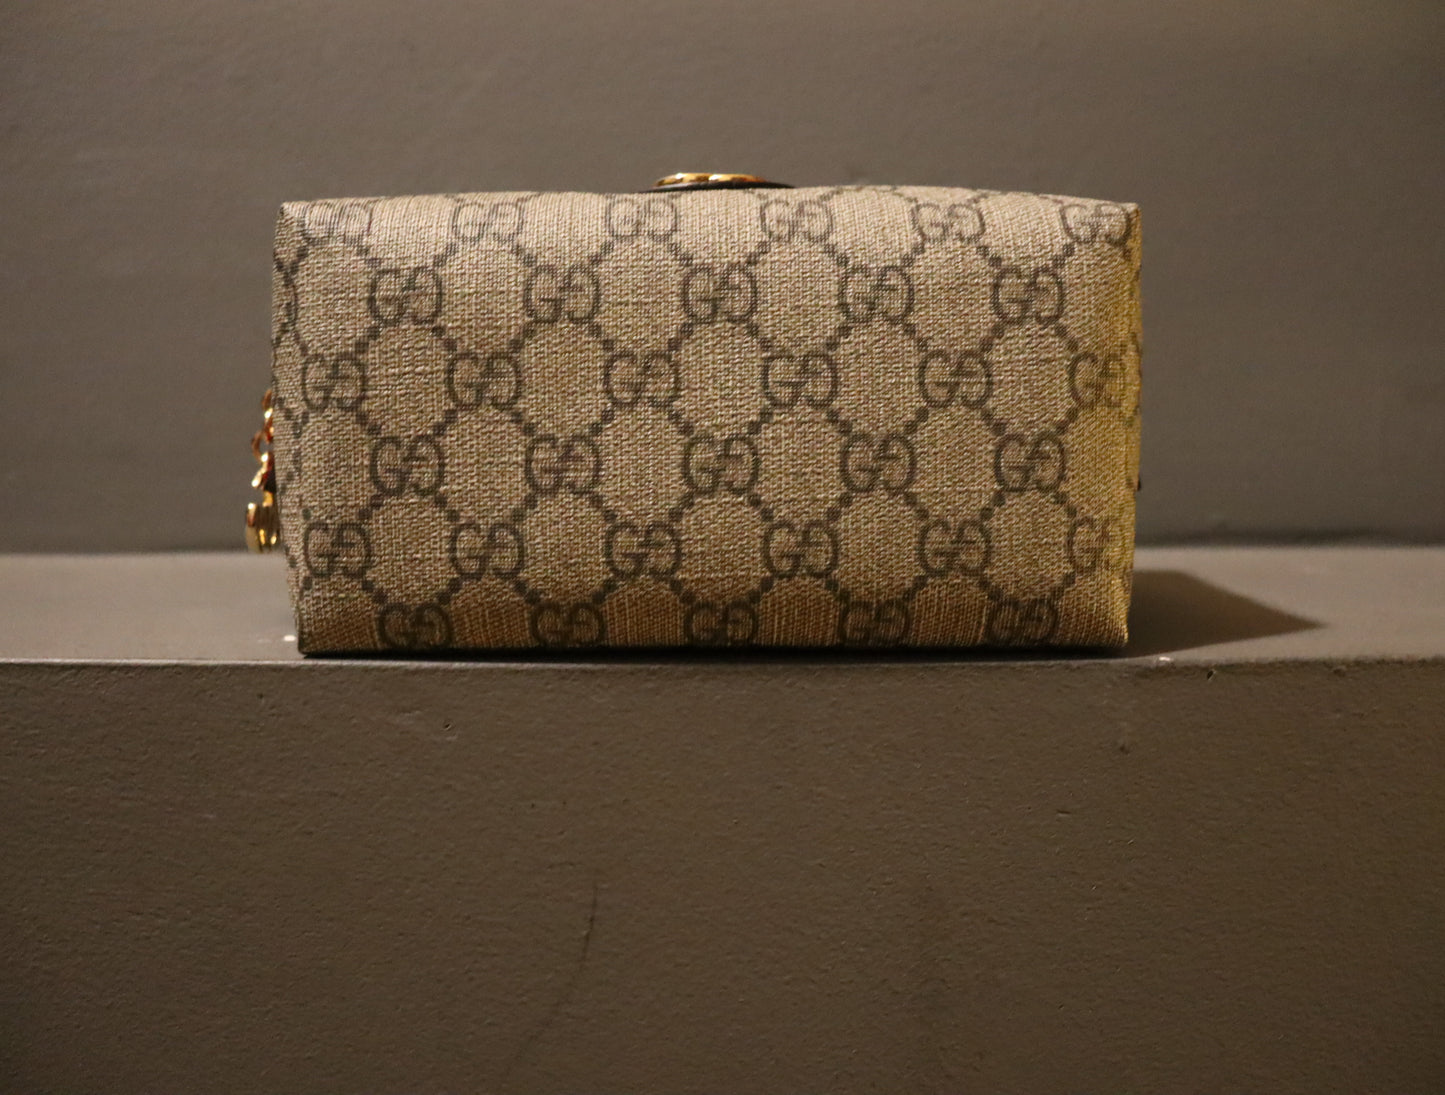 A luxurious Gucci Ophidia GG-Monogram Make-Up Bag crafted from GG-monogram canvas with leather trim and adorned with gold hardware. The bag measures approximately 3.3 inches in length, 7 inches in width, and 3.4 inches in depth. It boasts a striking red exterior and a green interior.